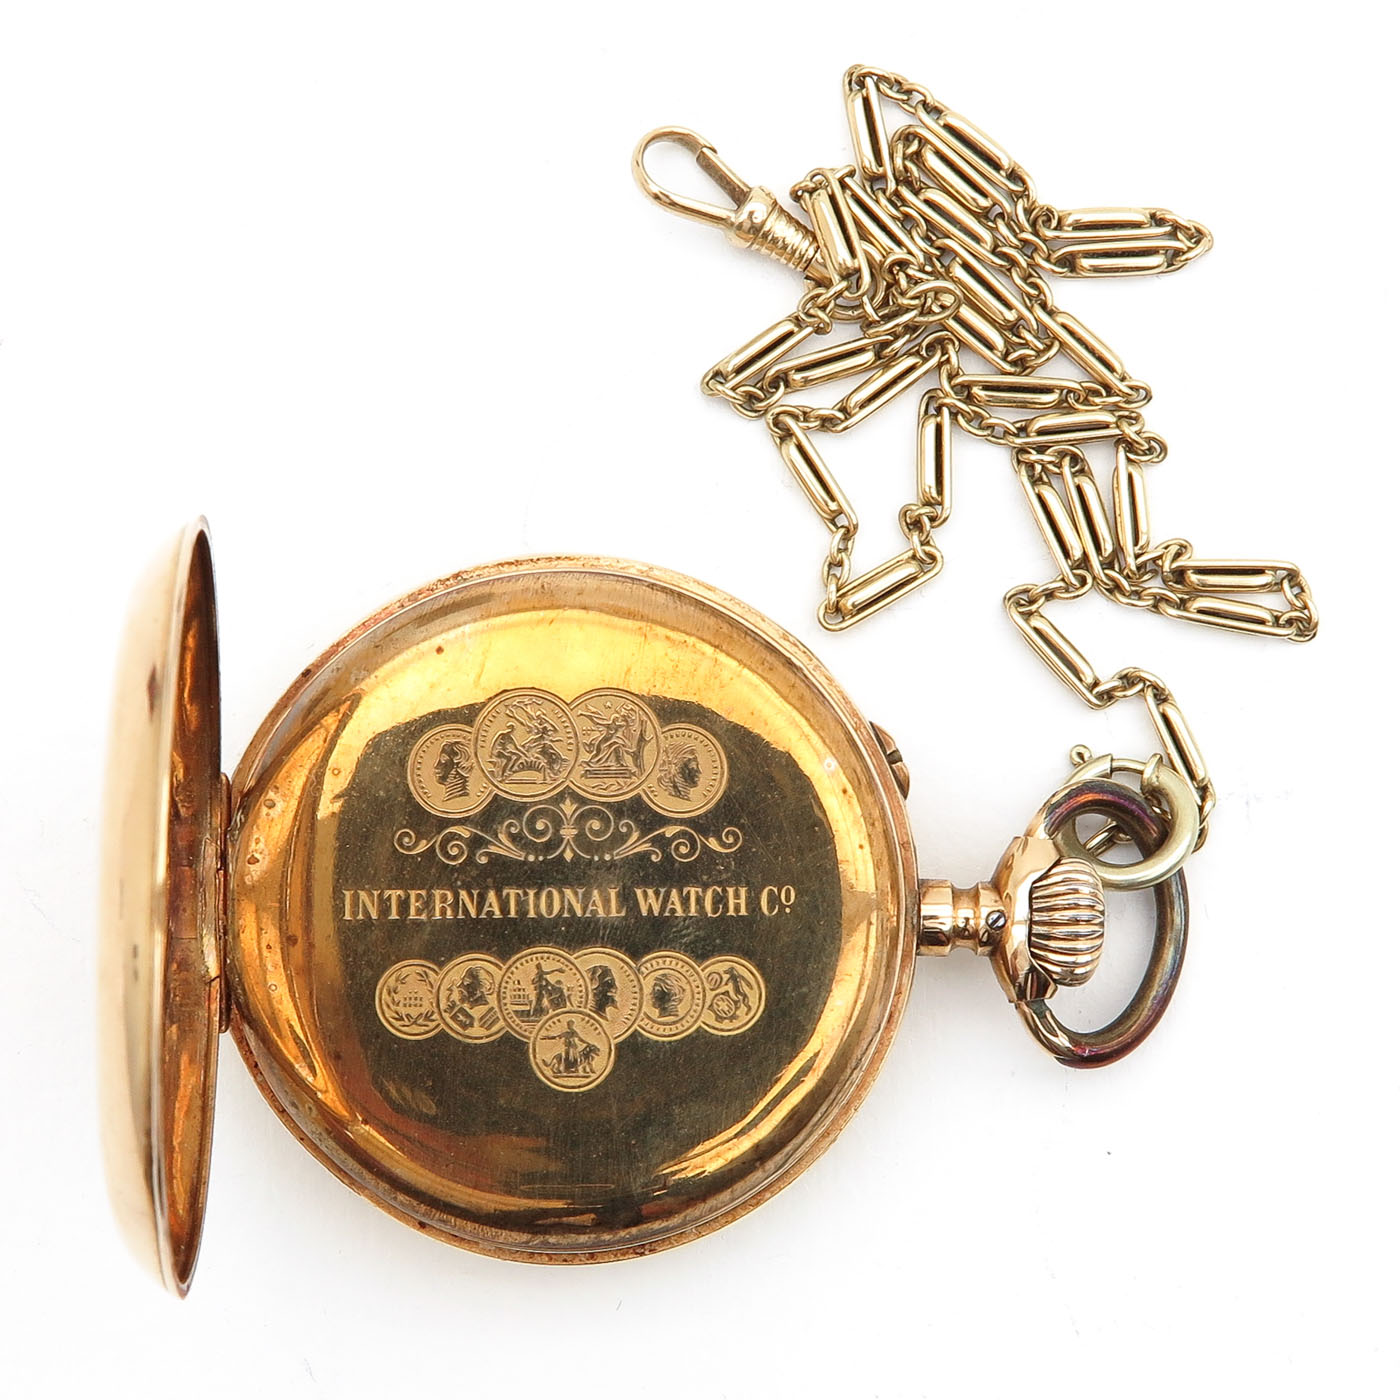 An IWC Pocket Watch - Image 4 of 6